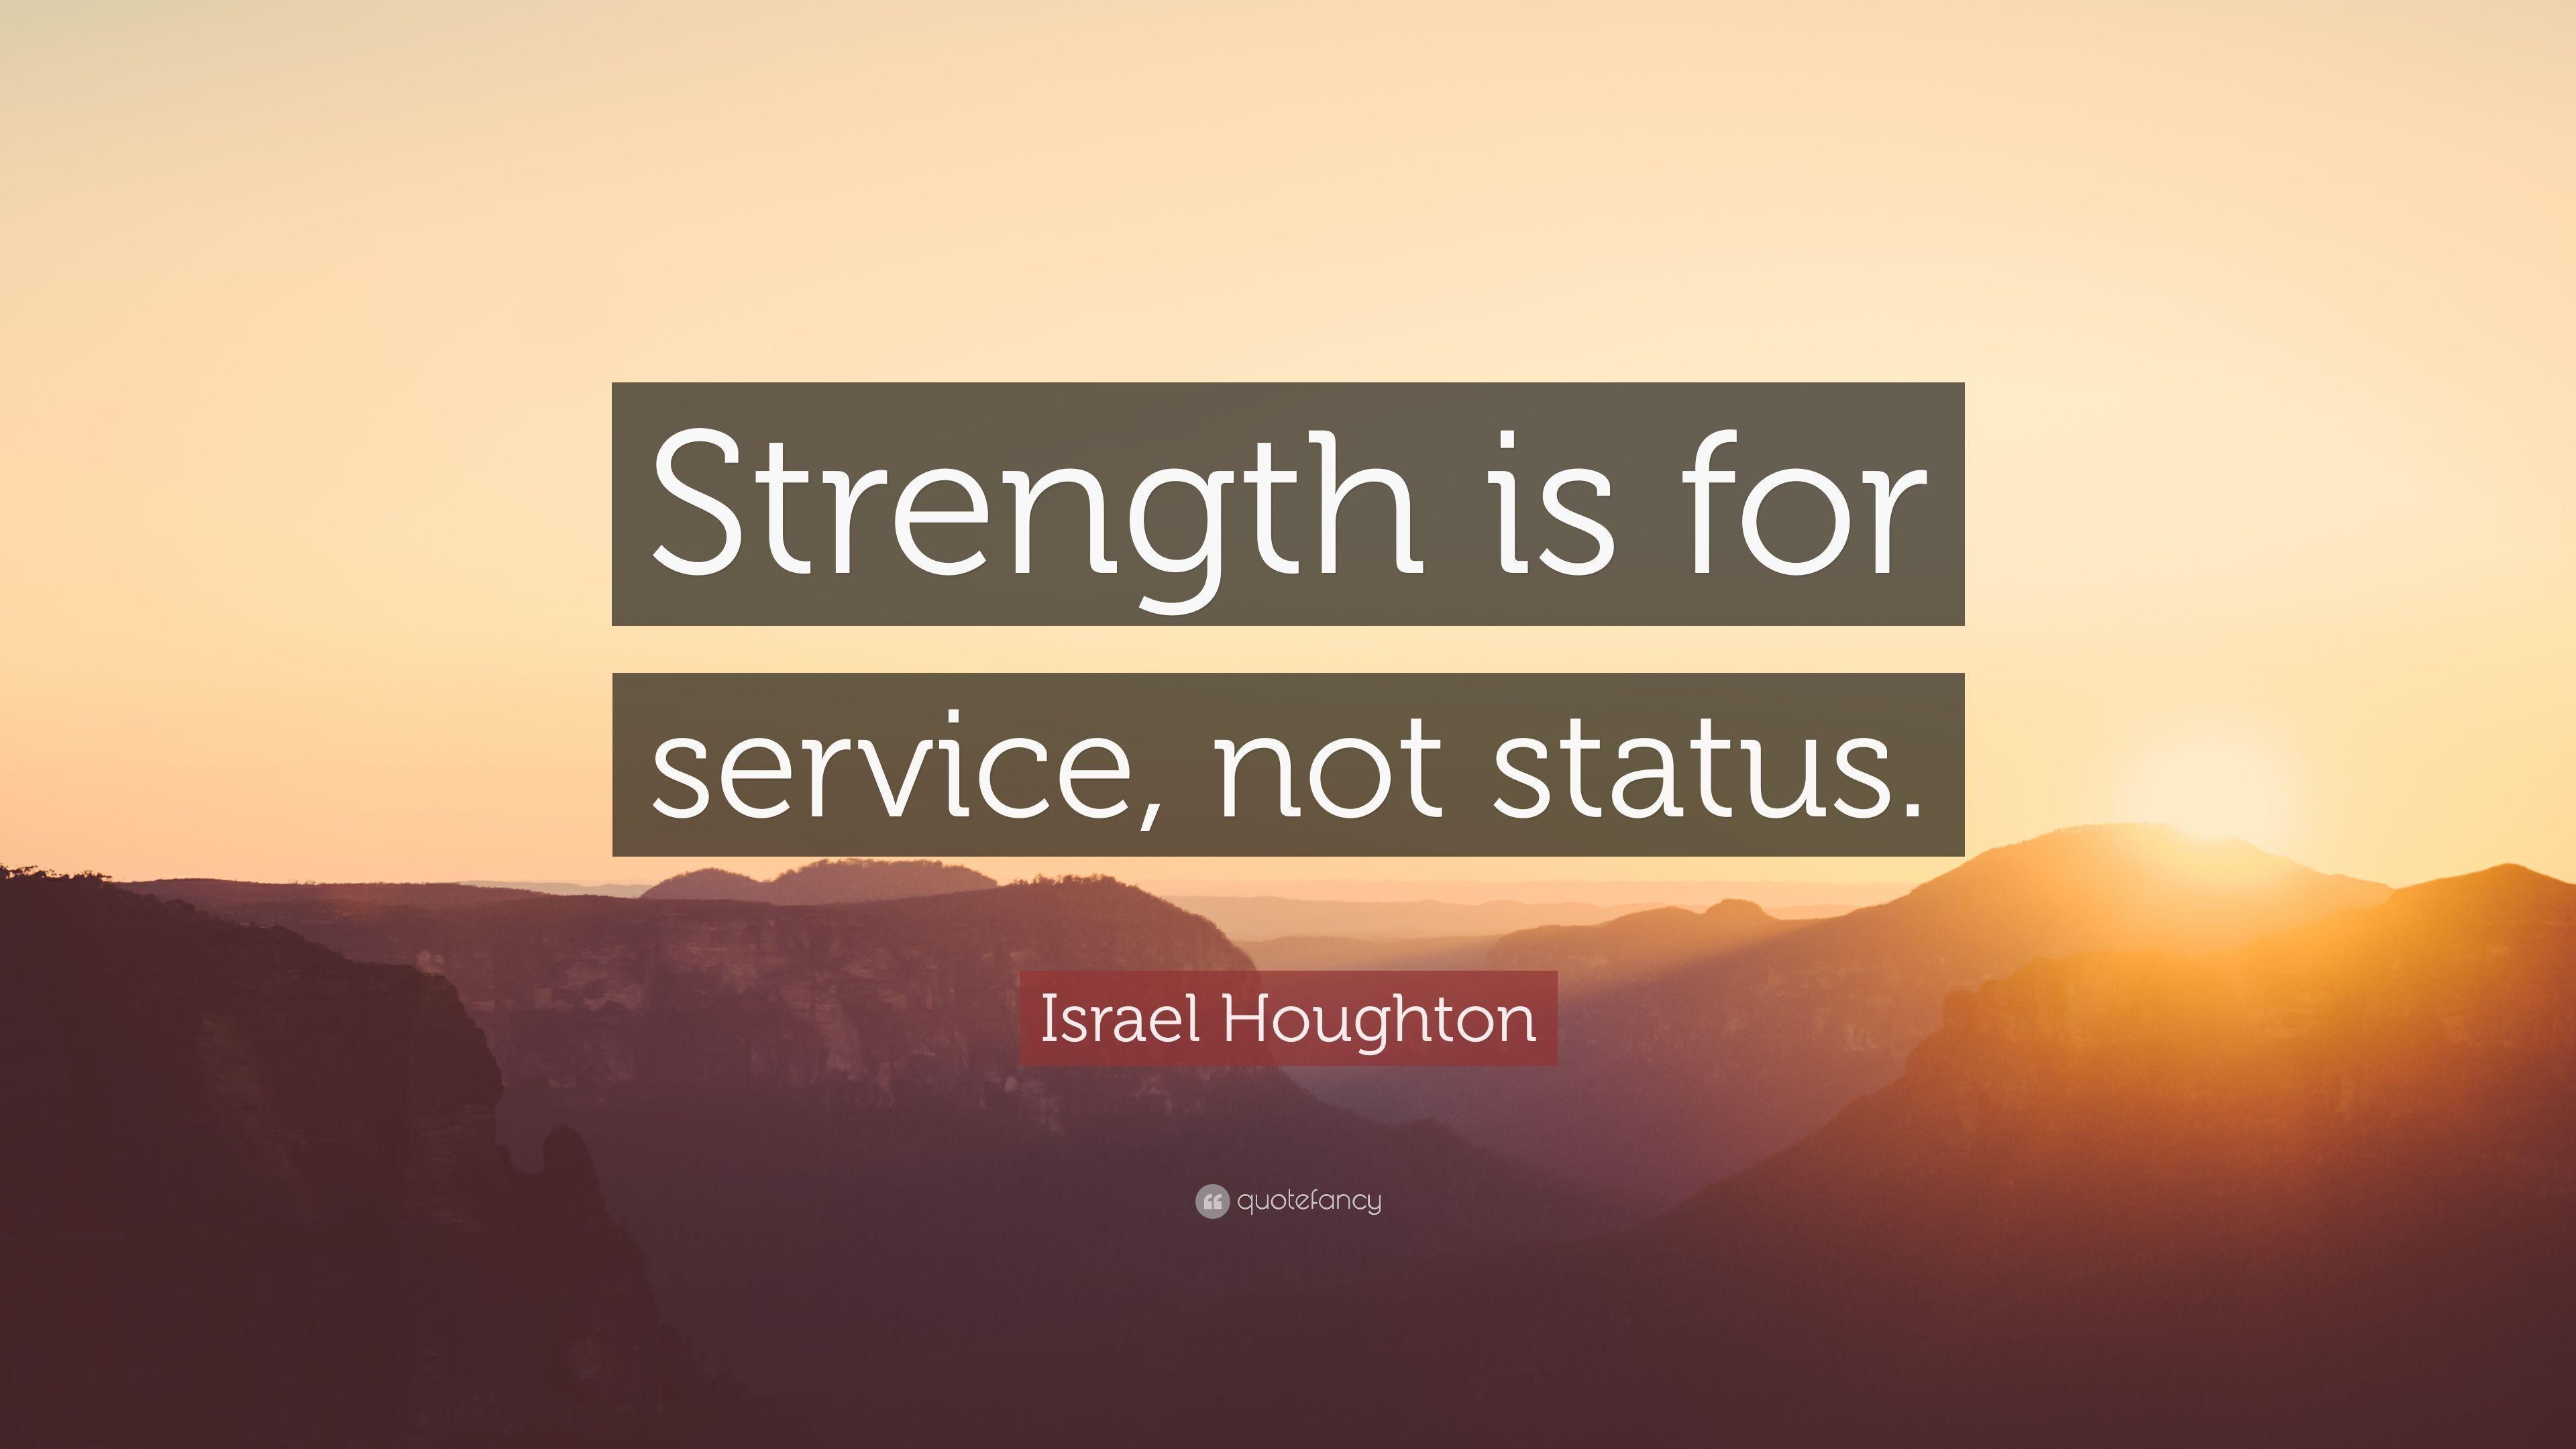 Israel Houghton Quote: “Strength is for service, not status.” 5